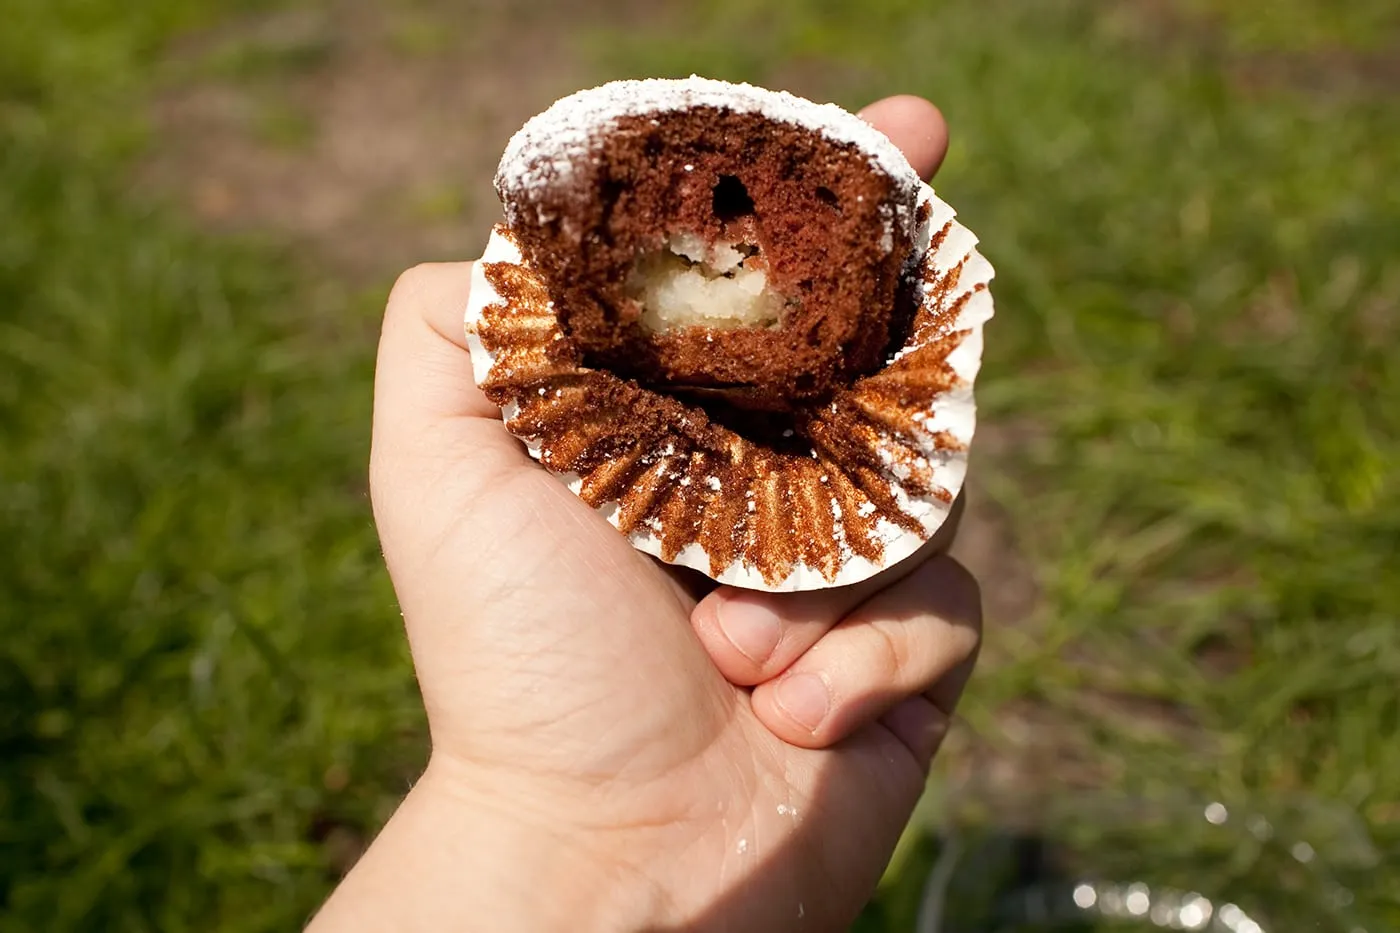 Mashed potato filled chocolate cupcake from Polo Café & Catering at Taste of Chicago